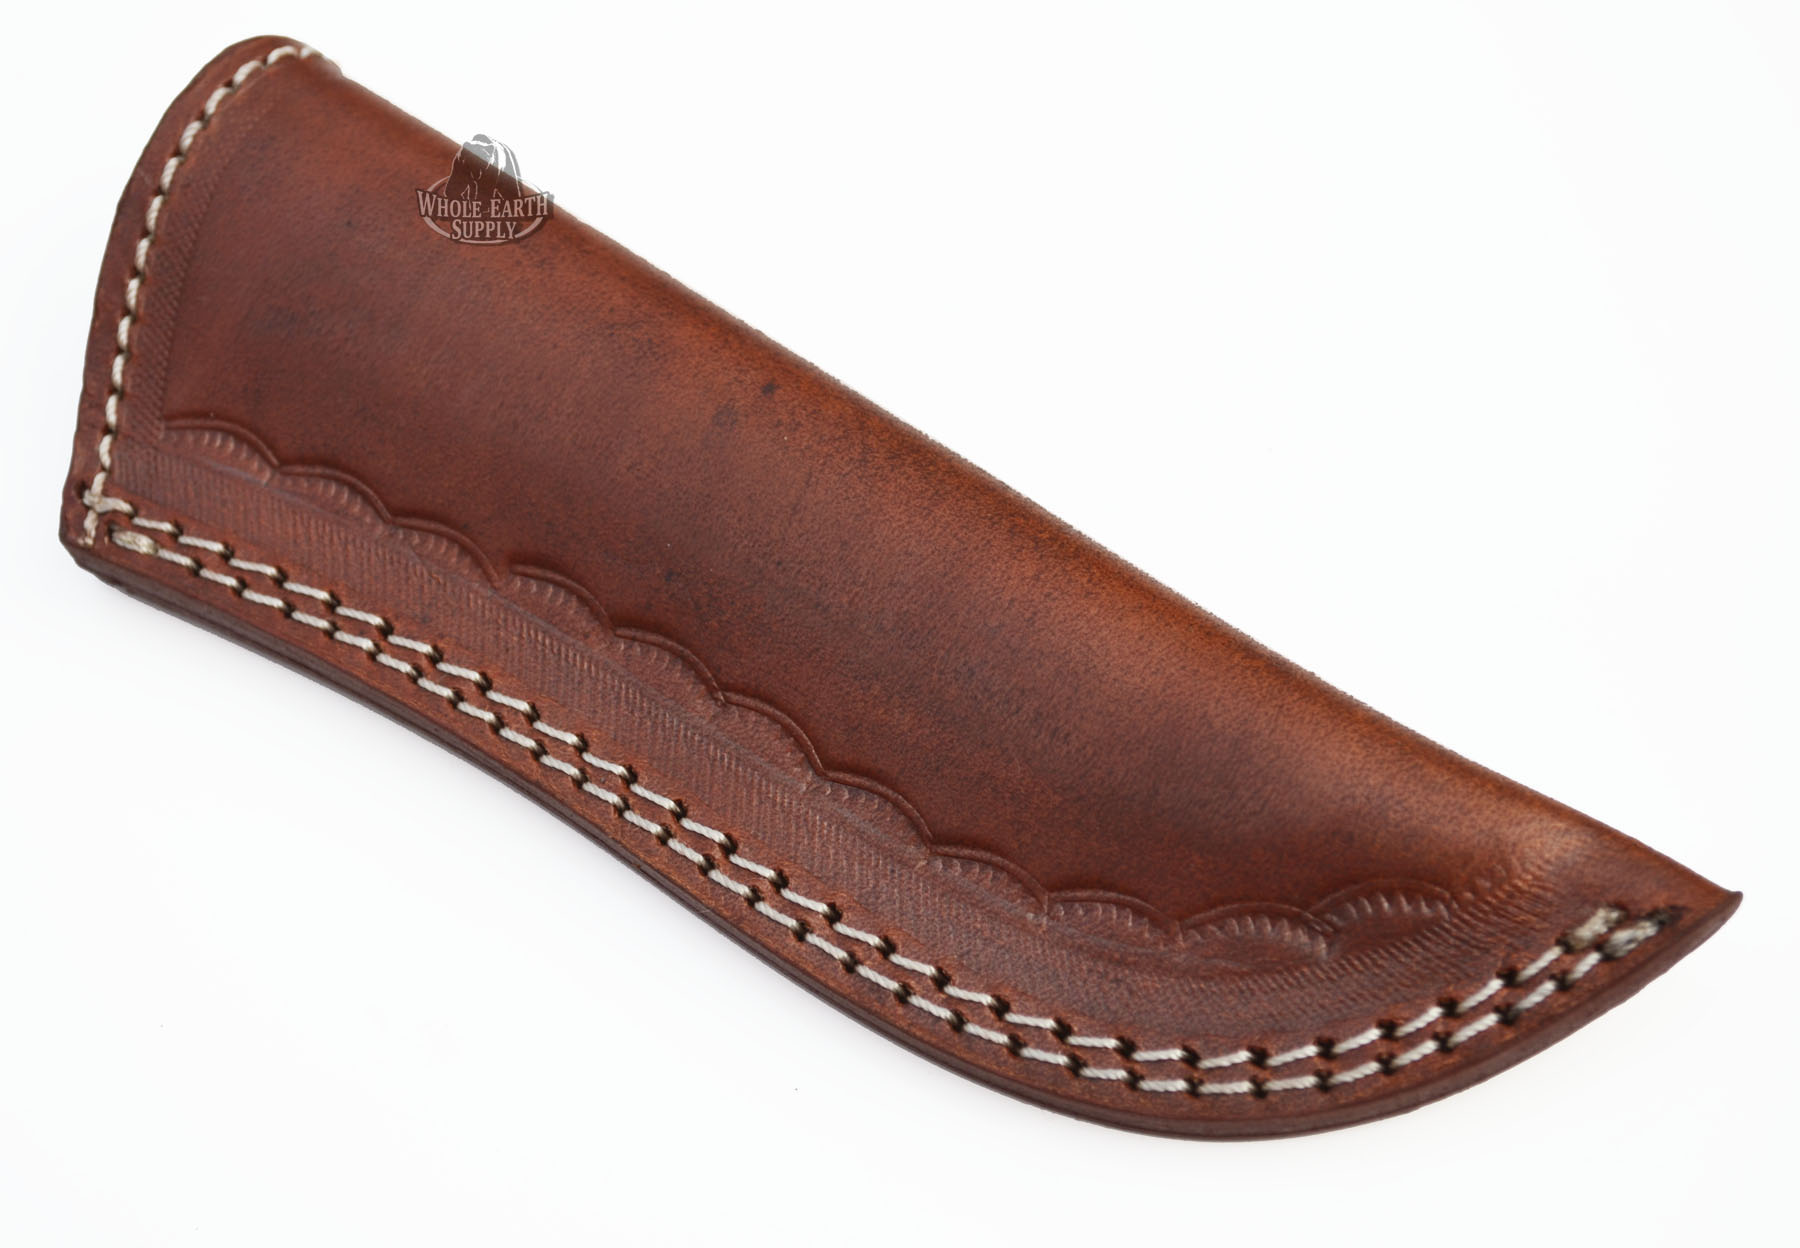 Large Brown Leather Sheath Fixed Blade Knife Fits up to 6in Blade Knives Skinning Blanks